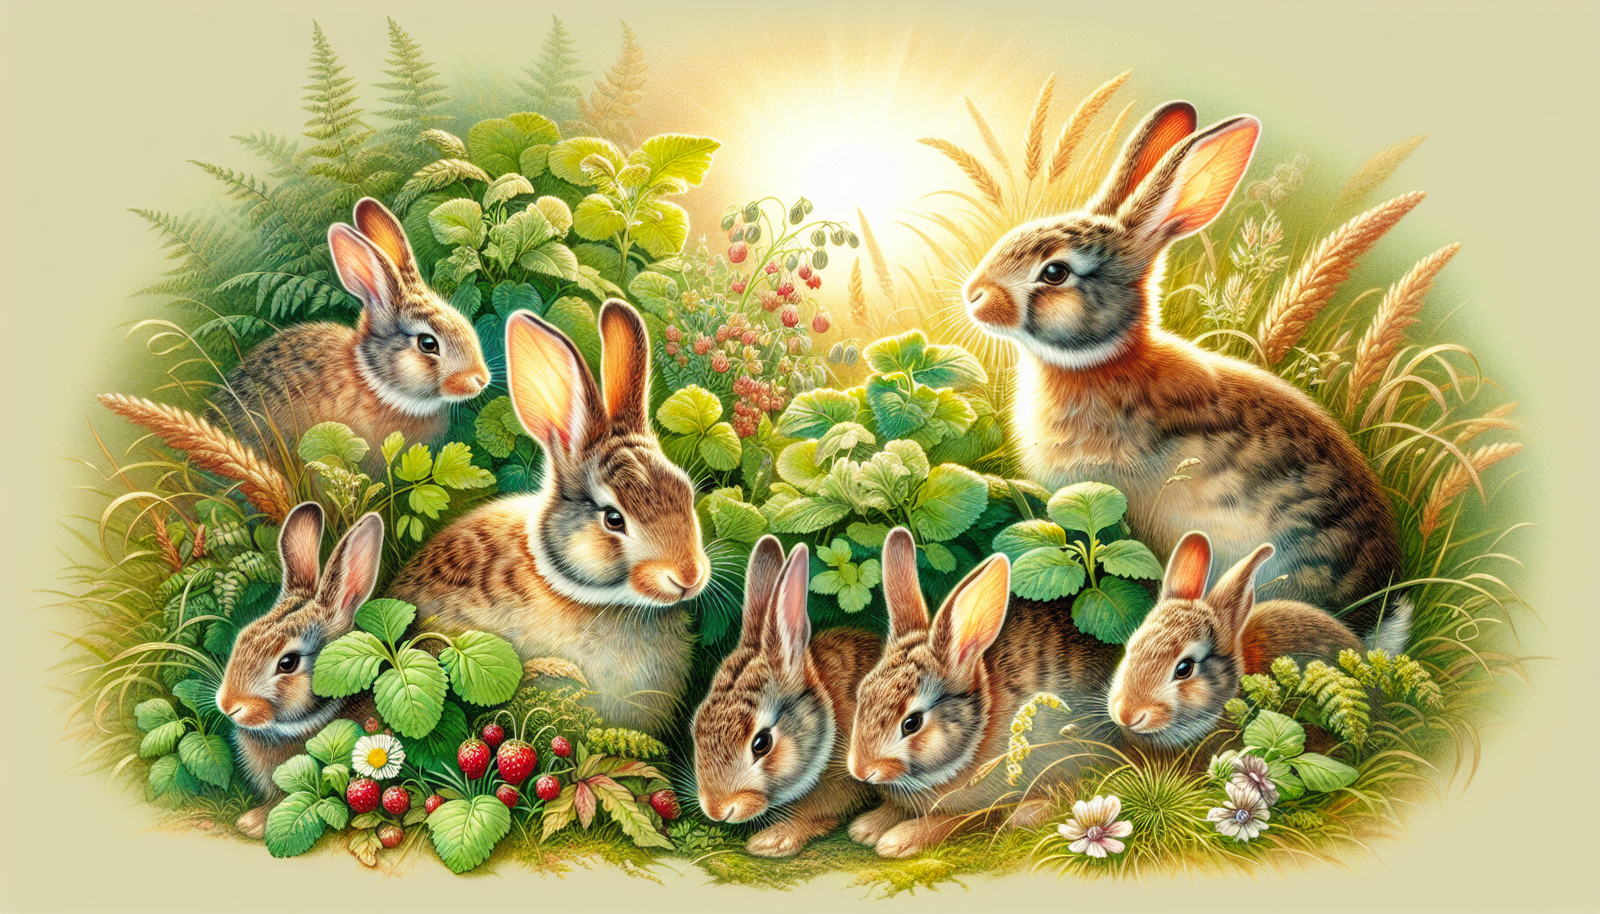 Illustration of wild rabbits grazing on grass and leafy plants